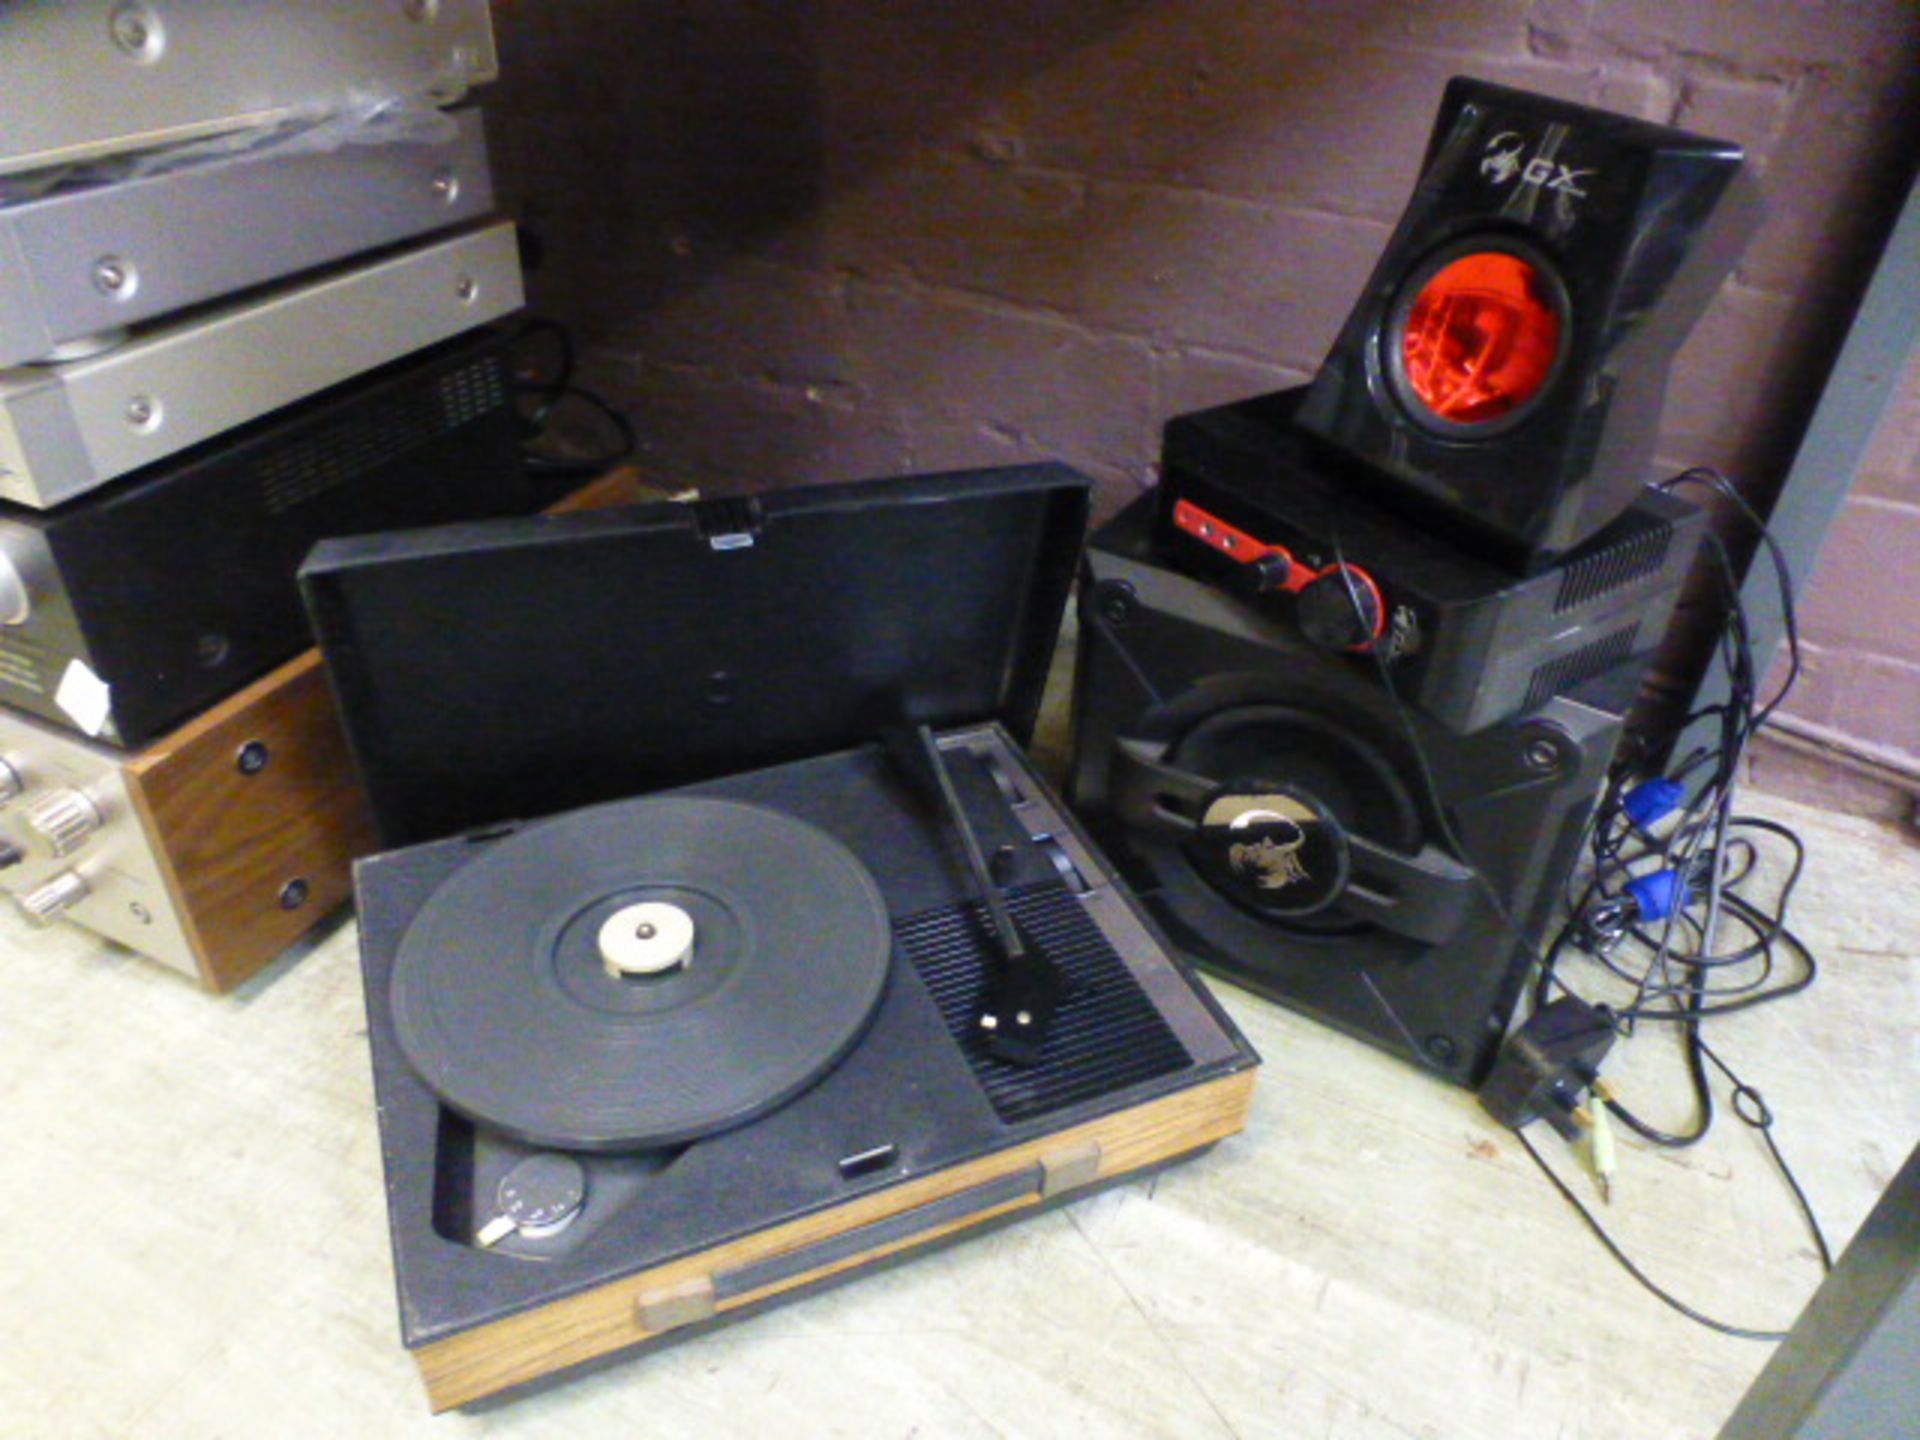 A turntable along with gaming speakers